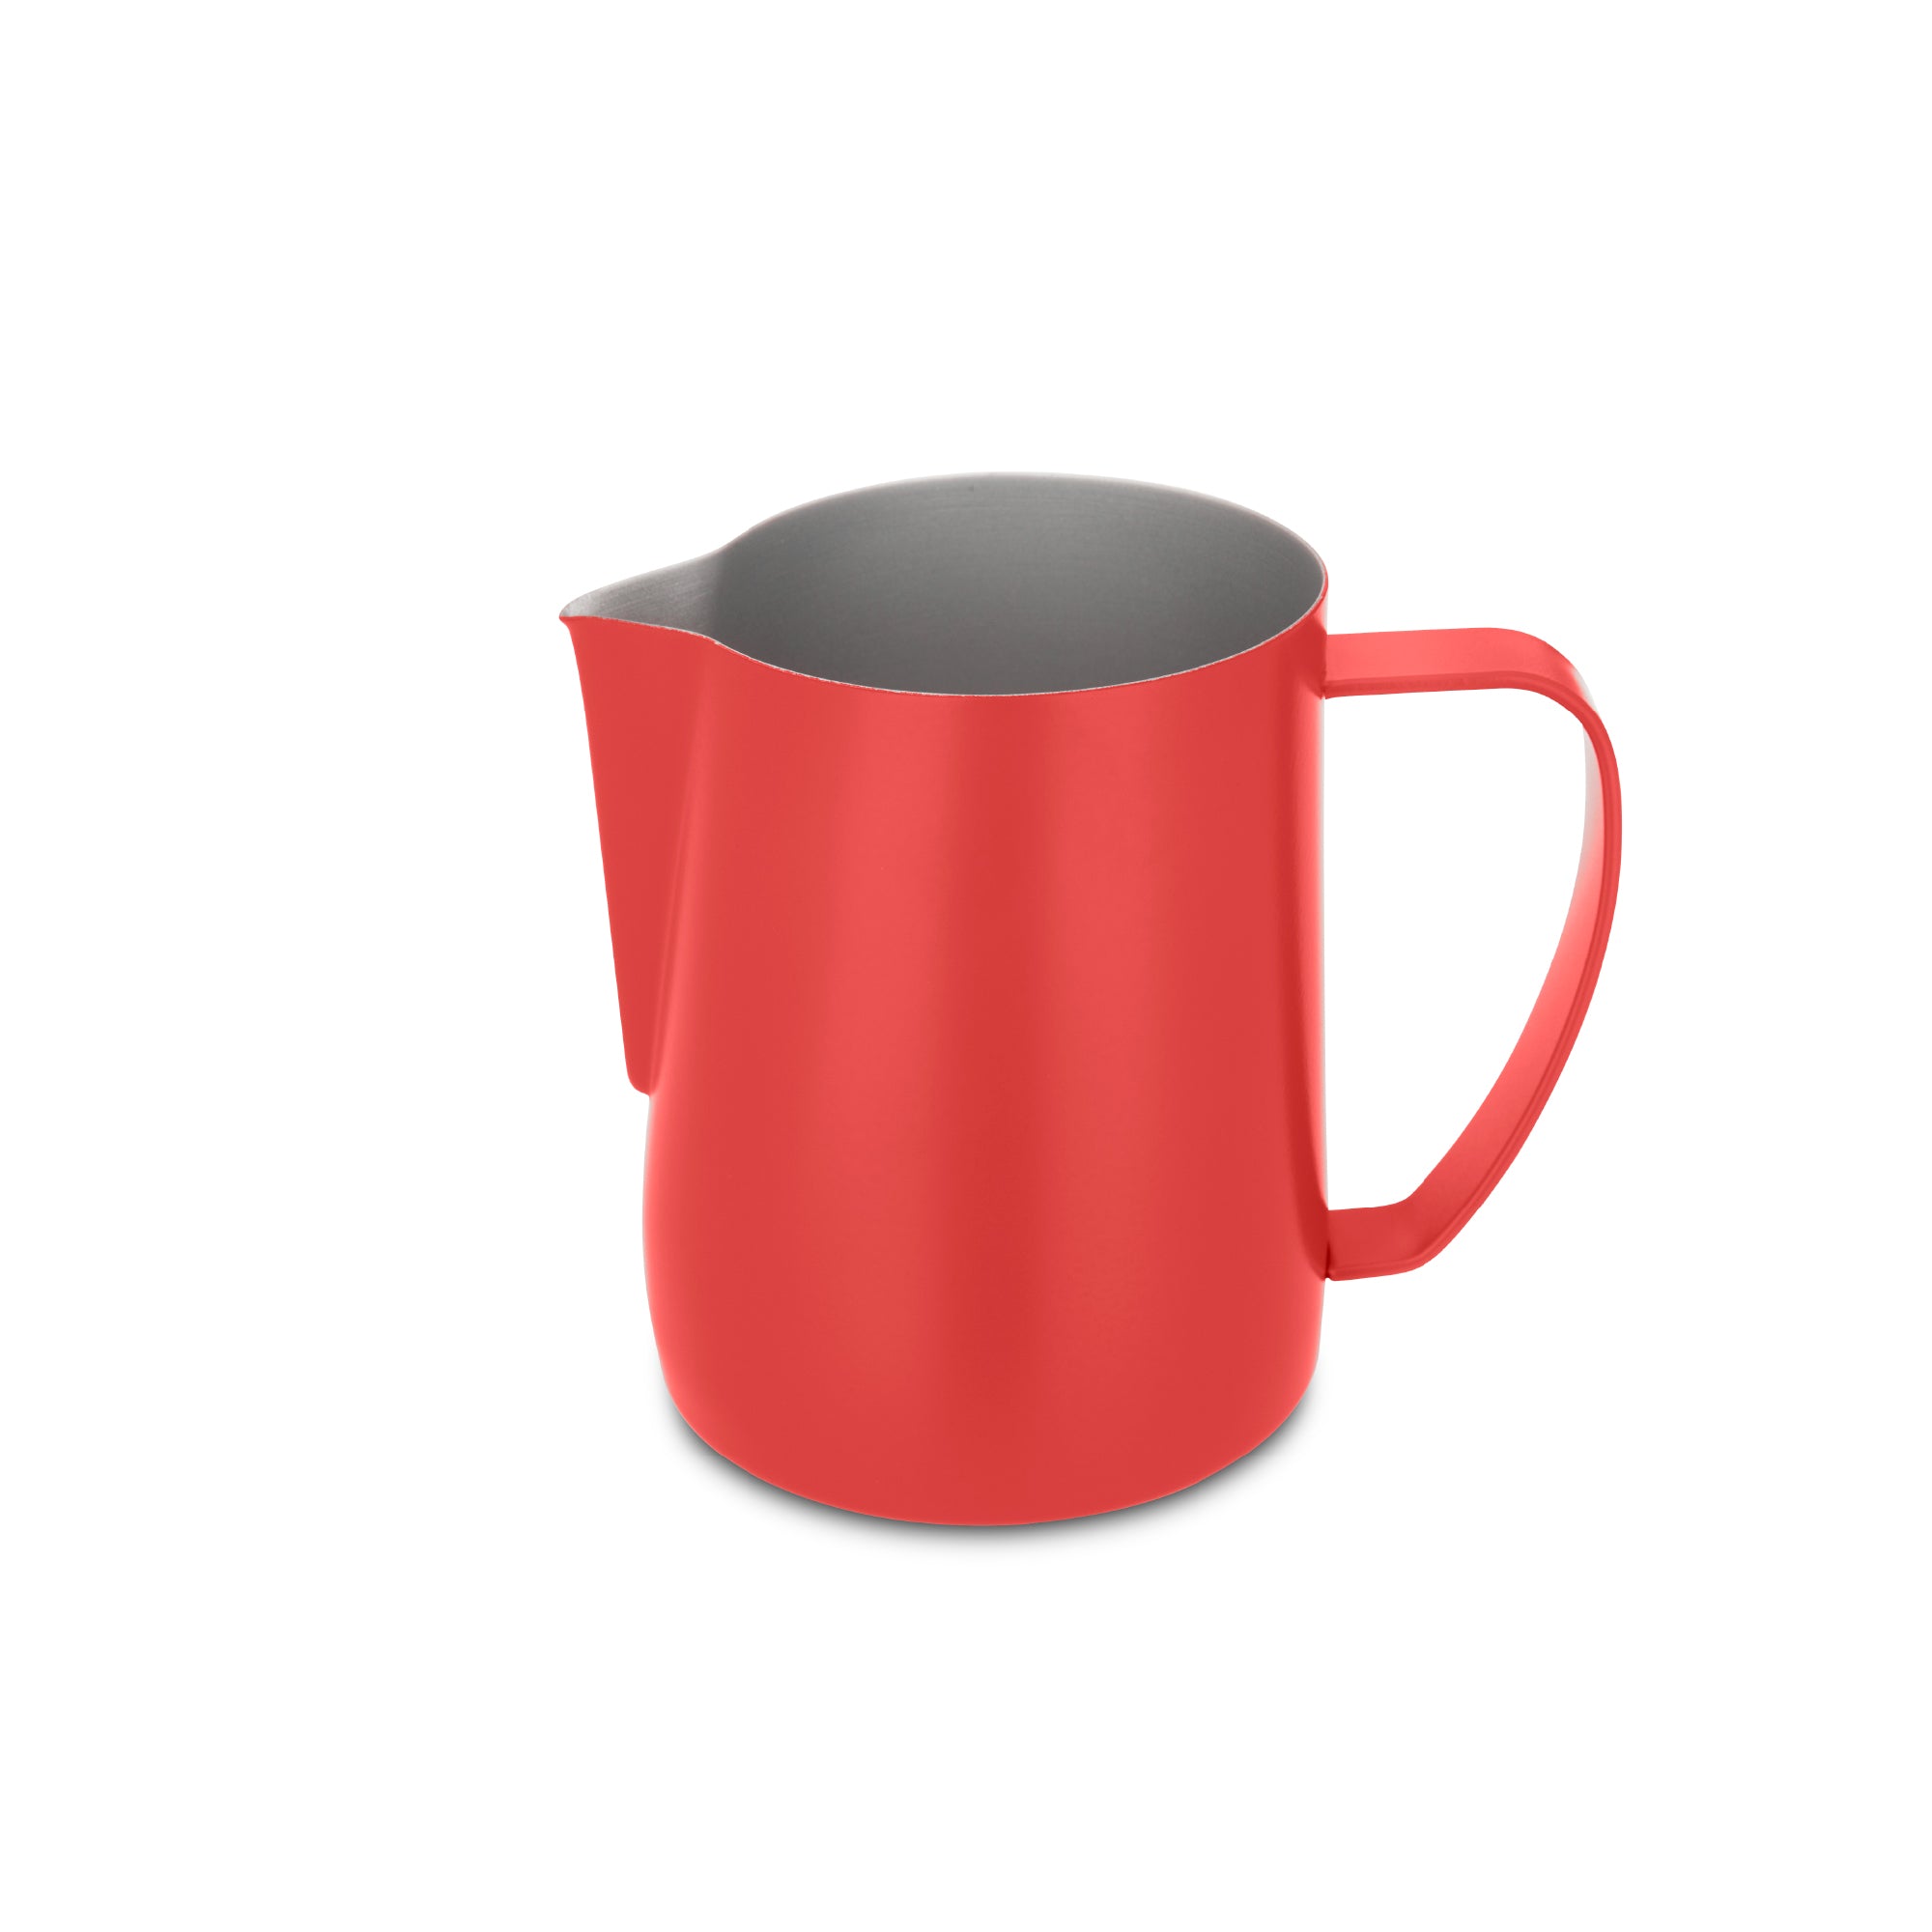 https://cdn.shopify.com/s/files/1/0293/4380/9620/products/espressoworks-milk-frothing-jug-stainless-steel-matte-red-six-hundred-ml-01_2000x.jpg?v=1604995525